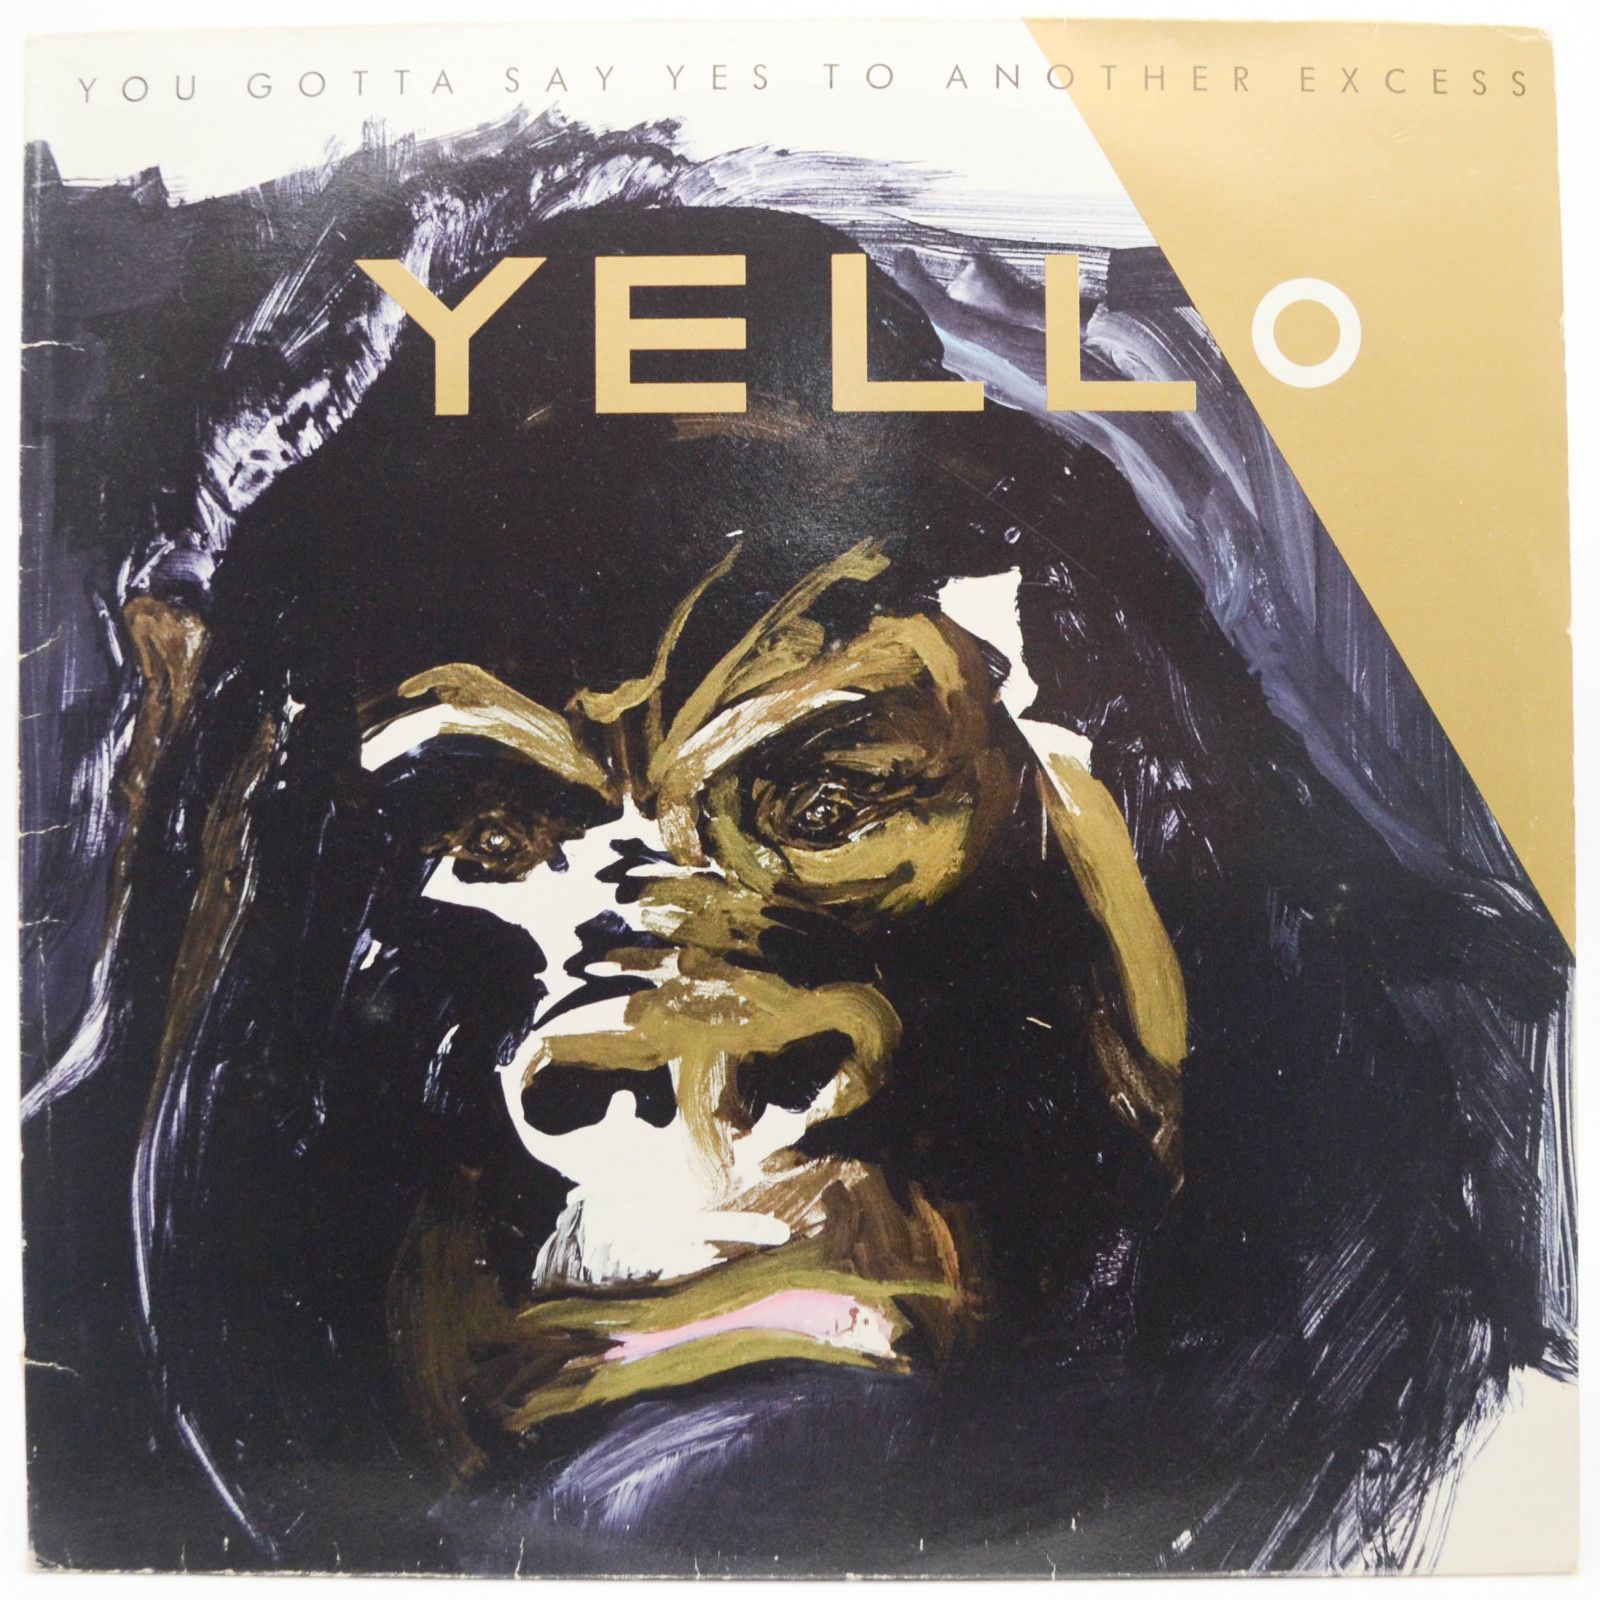 Yello — You Gotta Say Yes To Another Excess, 1983